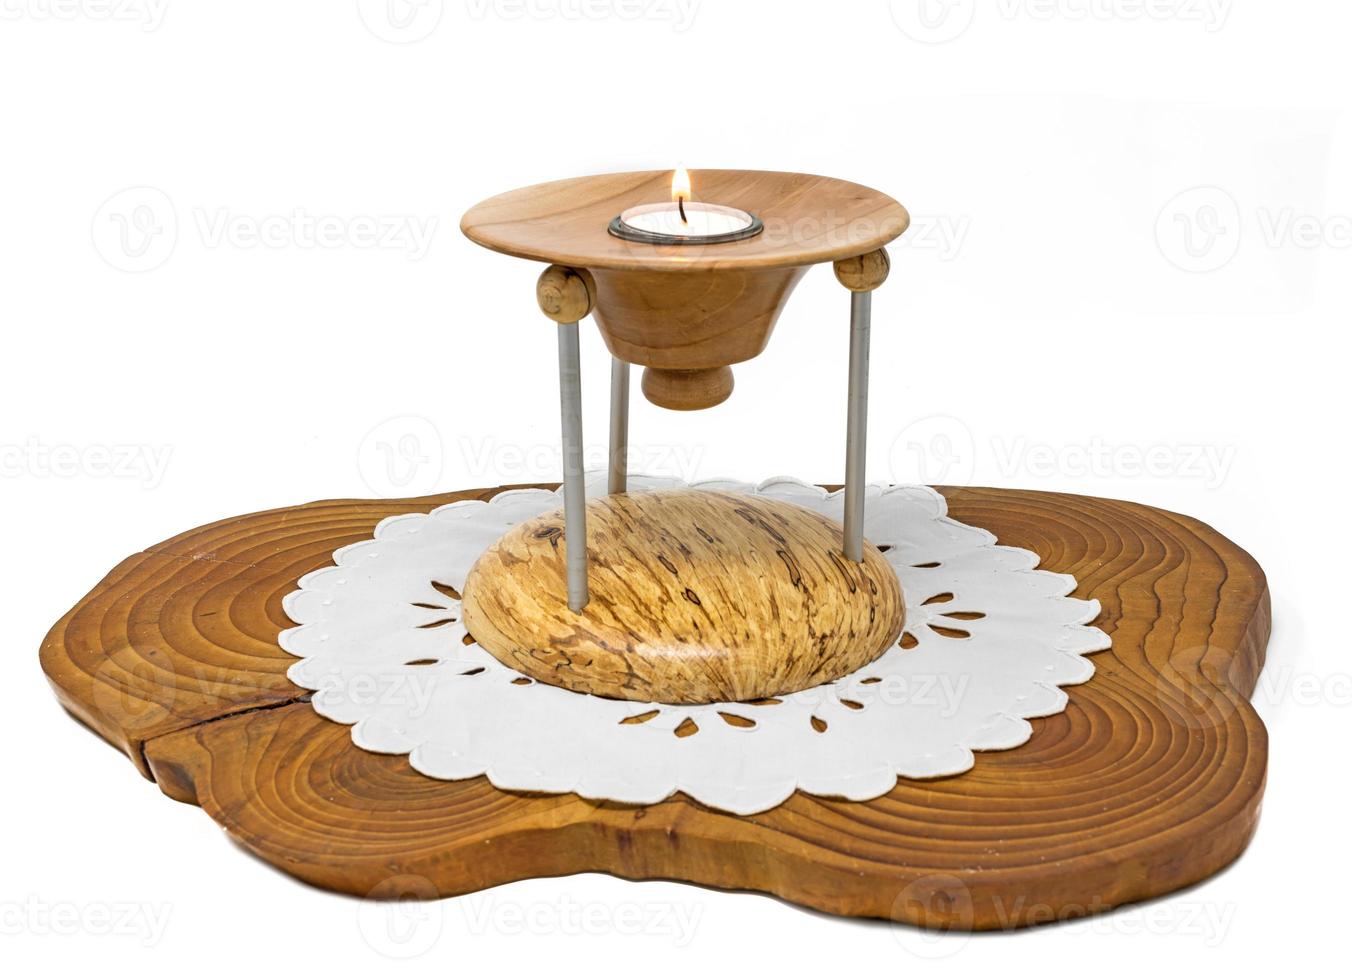 Multi part wooden candlestick with burning candle stands on a dark wooden board photo